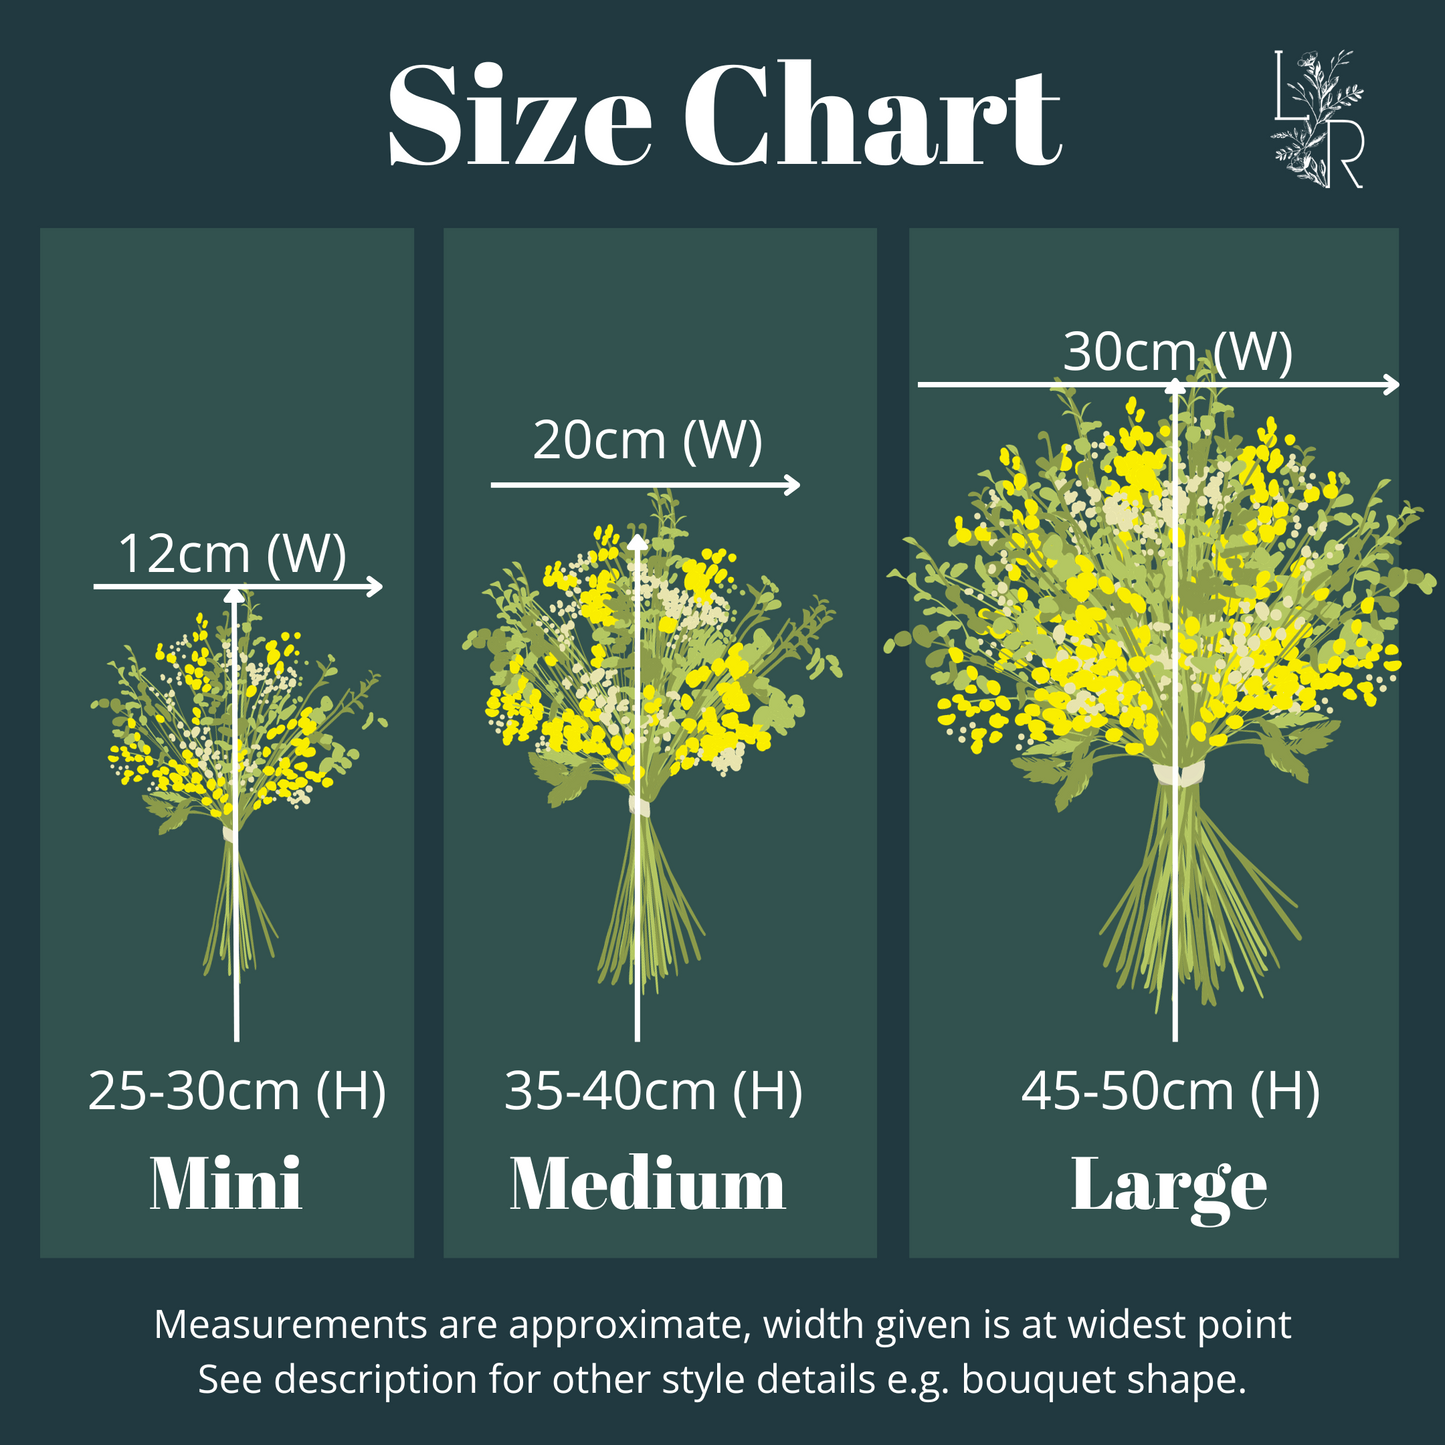 A size chart with illustrations of three sizes of bouquet. The Mini size is shown to be 25-30cm tall and 12cm wide. Medium size is shown to be 35-40cm tall and 20cm wide. The Large size is shown to be 45-50cm tall and 30 wide. The text under the images says the dimensions are taken at the widest points and are approximate.